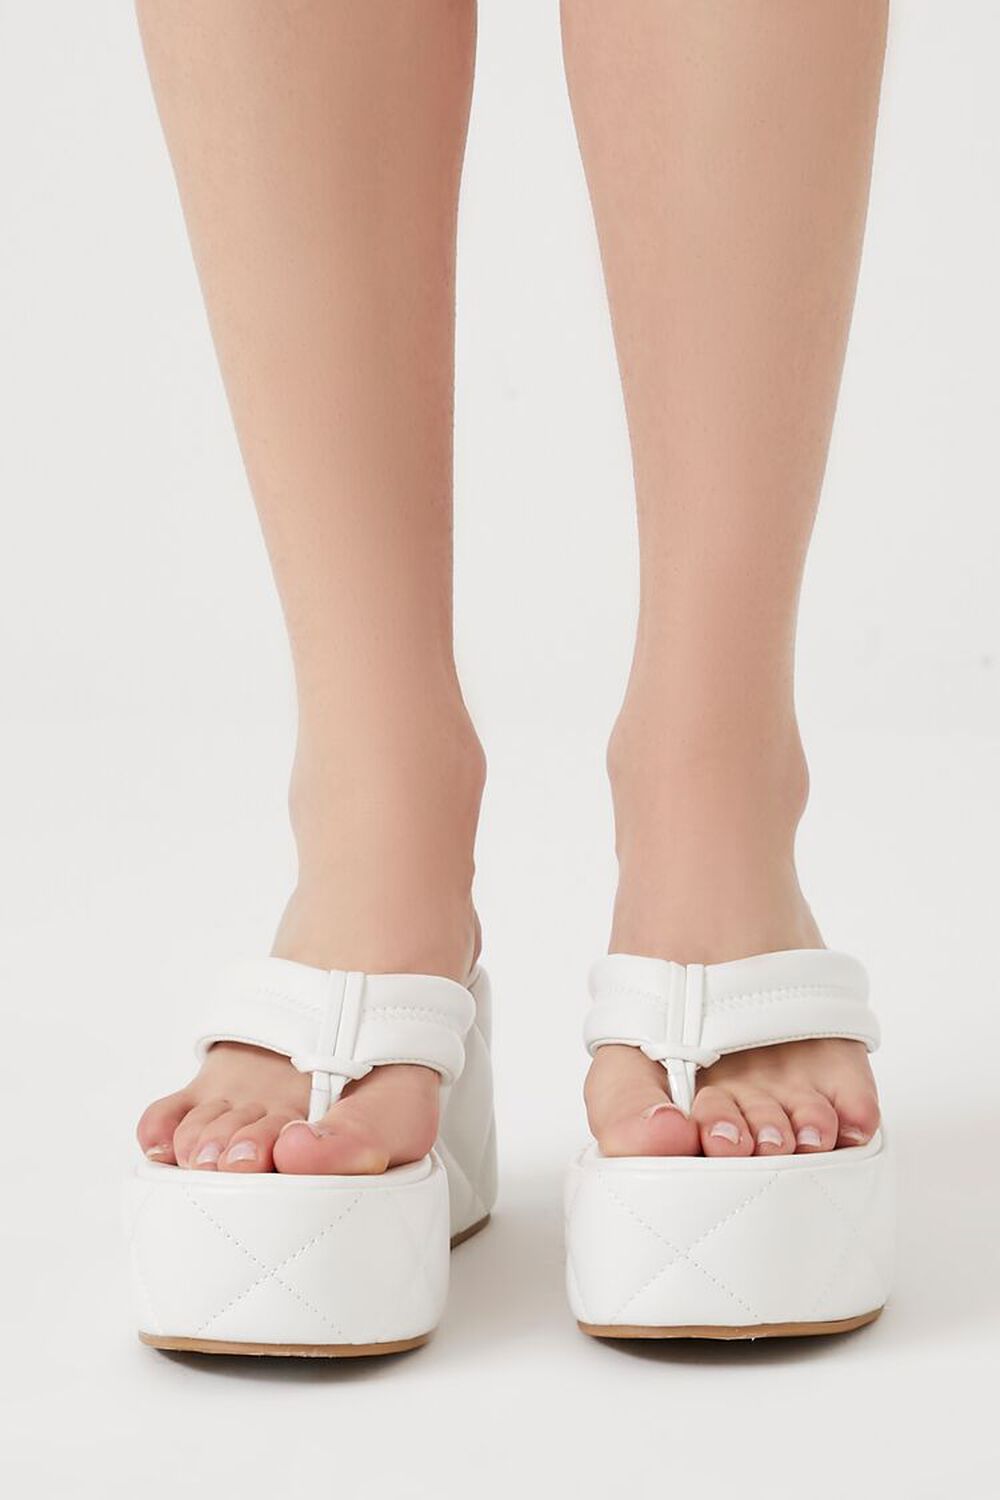 WHITE Faux Leather Quilted Wedges, image 3